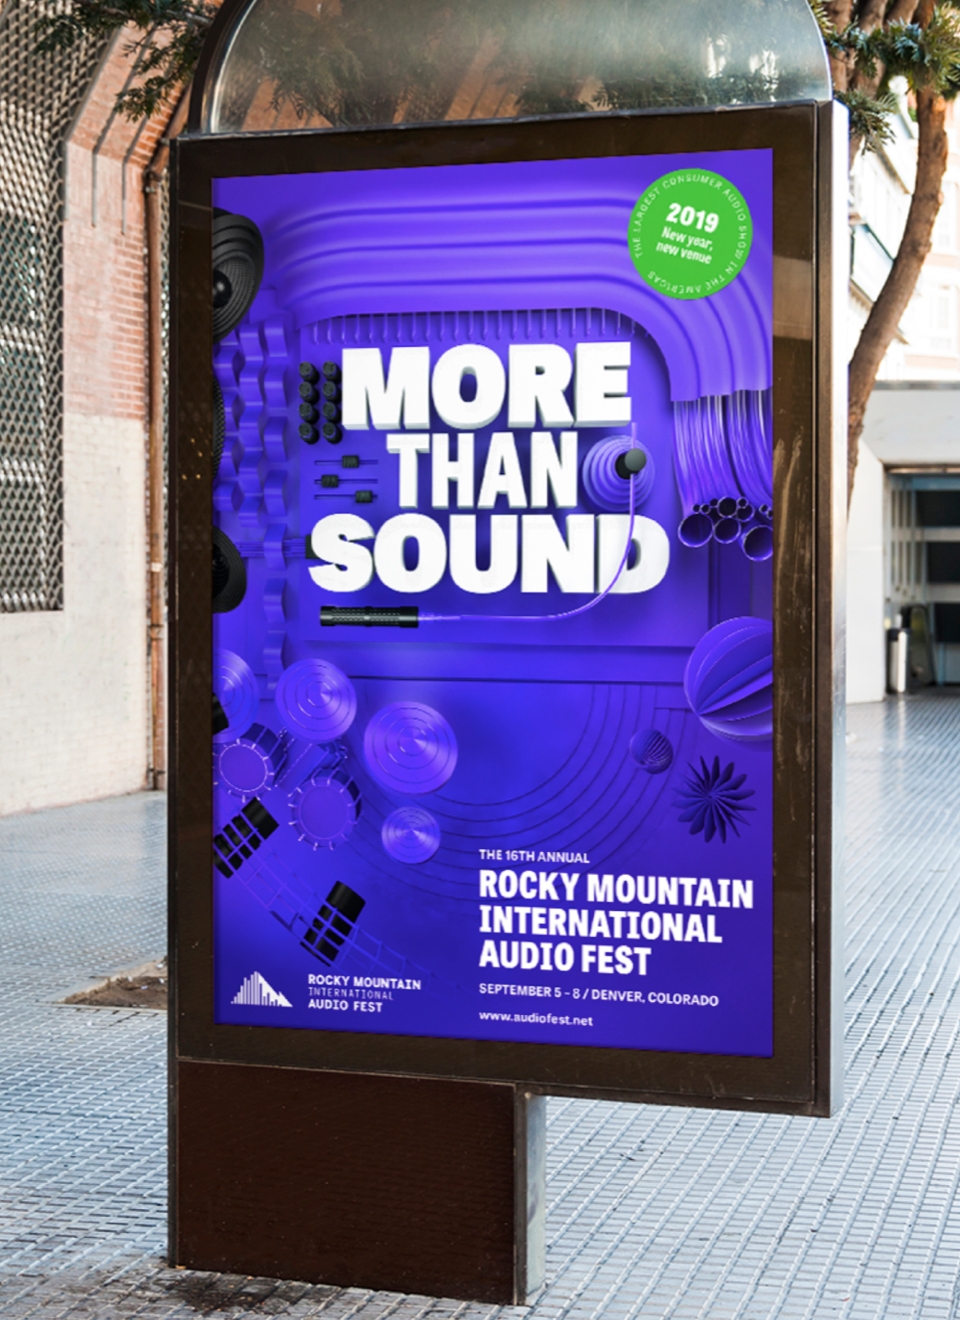 A photograph of the Rocky Mountain Audio Festival "More than Sound" street poster